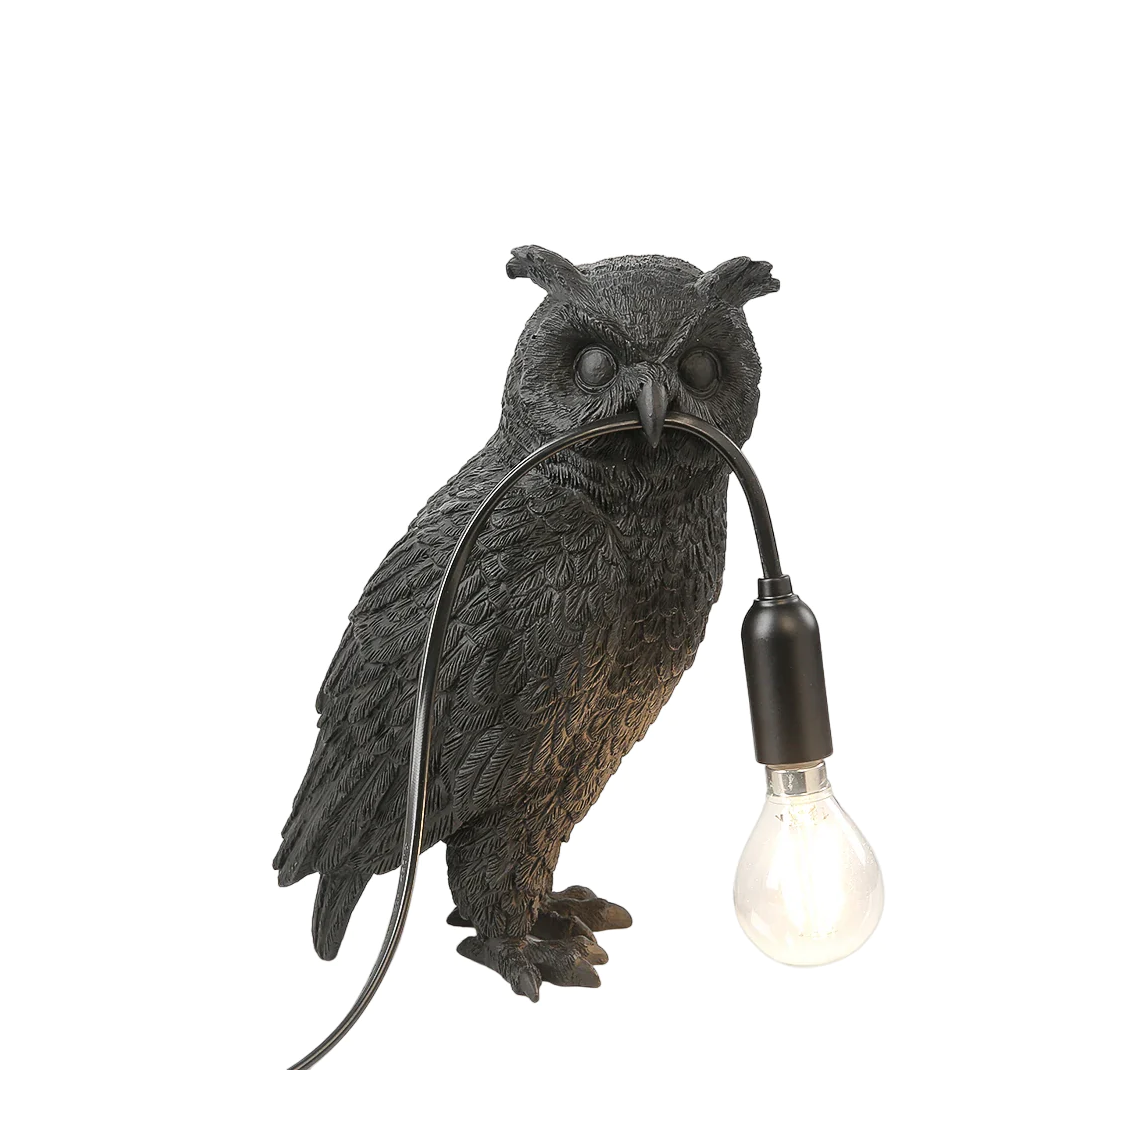 Old Owl Lamp on a white background